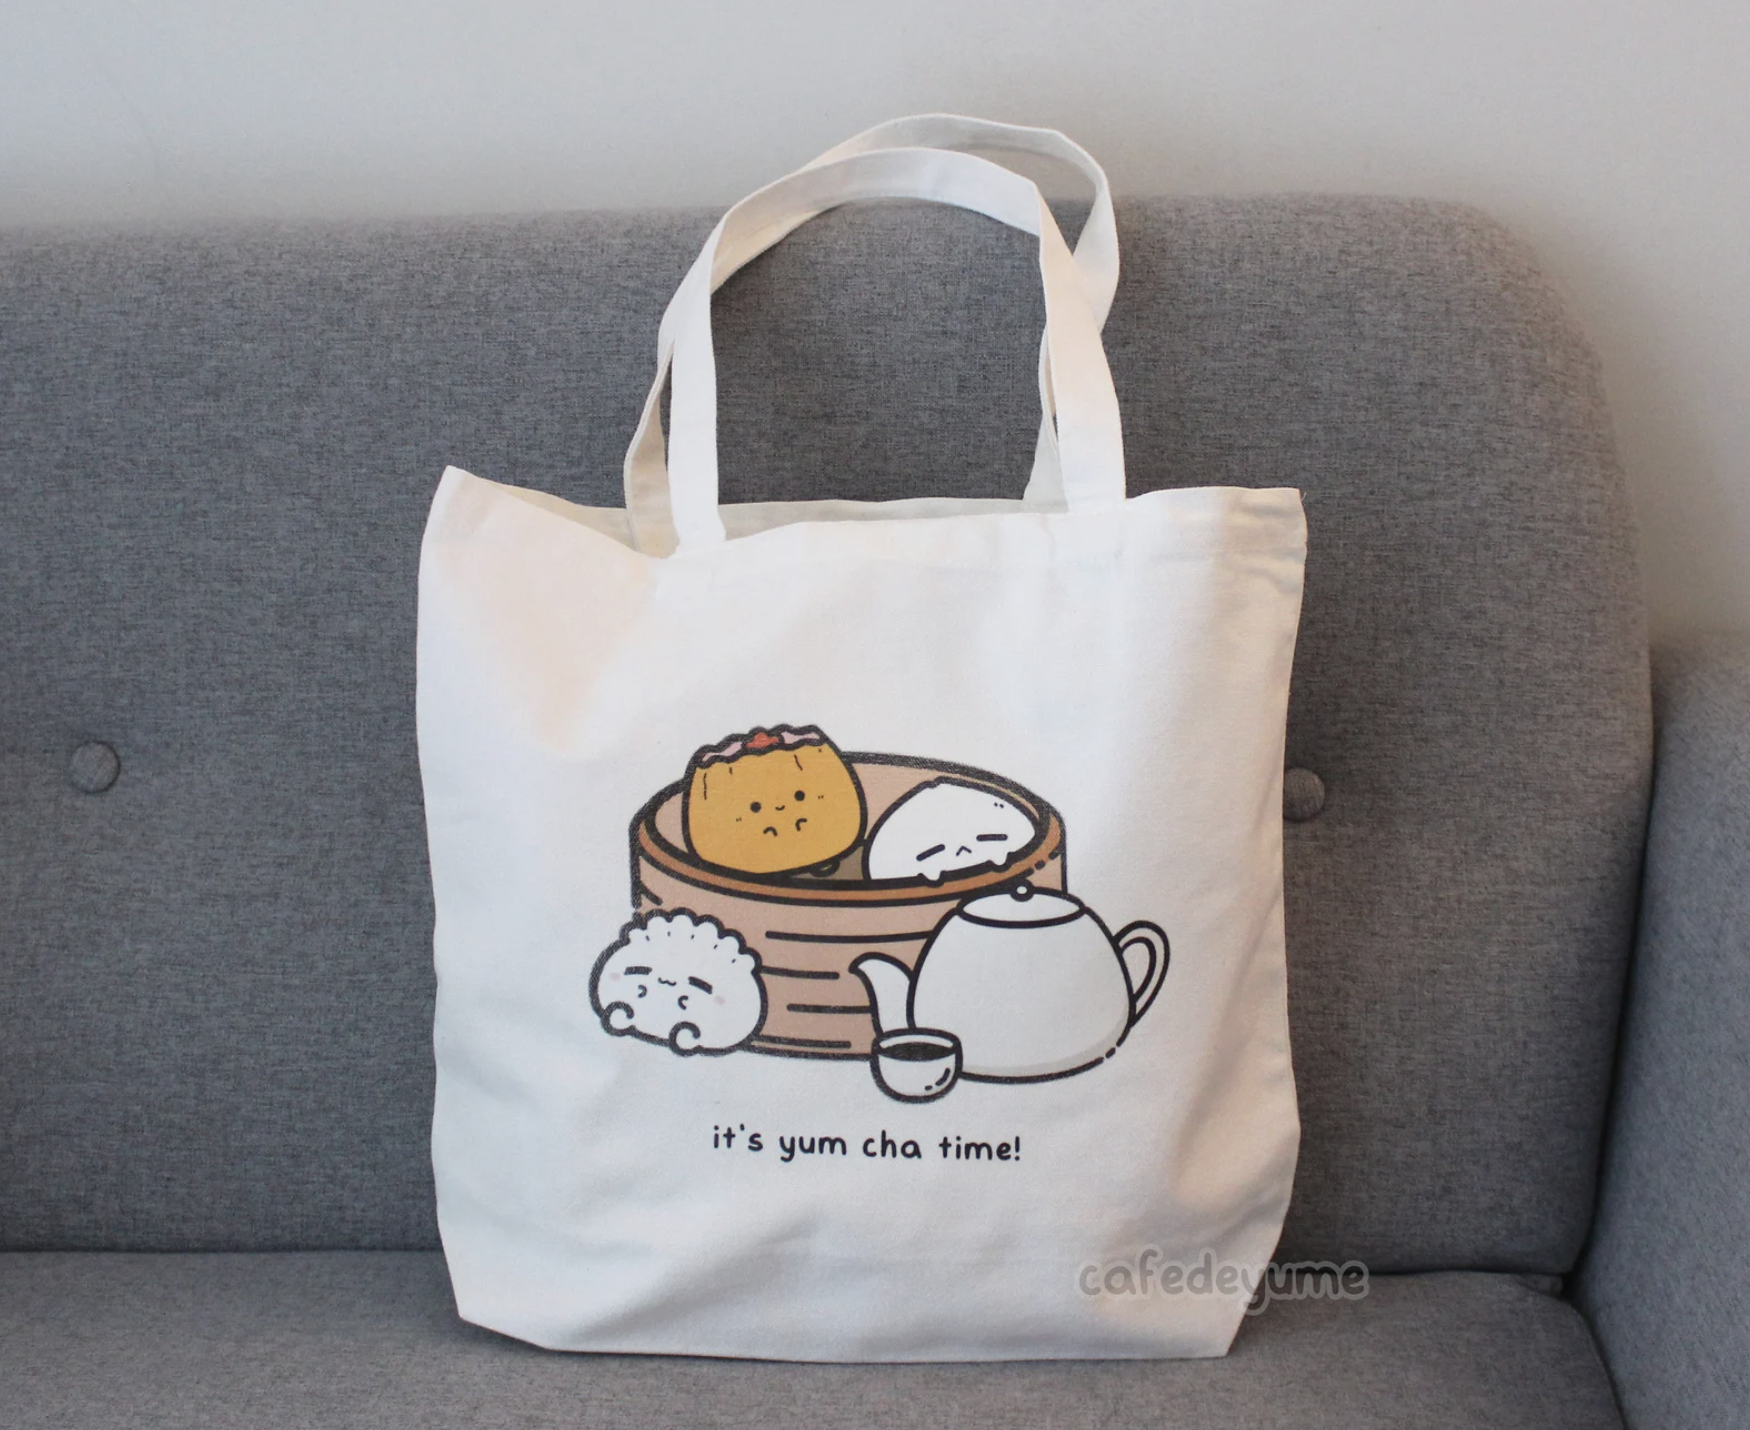 Tote bag with cartoon dim sum characters on a couch.